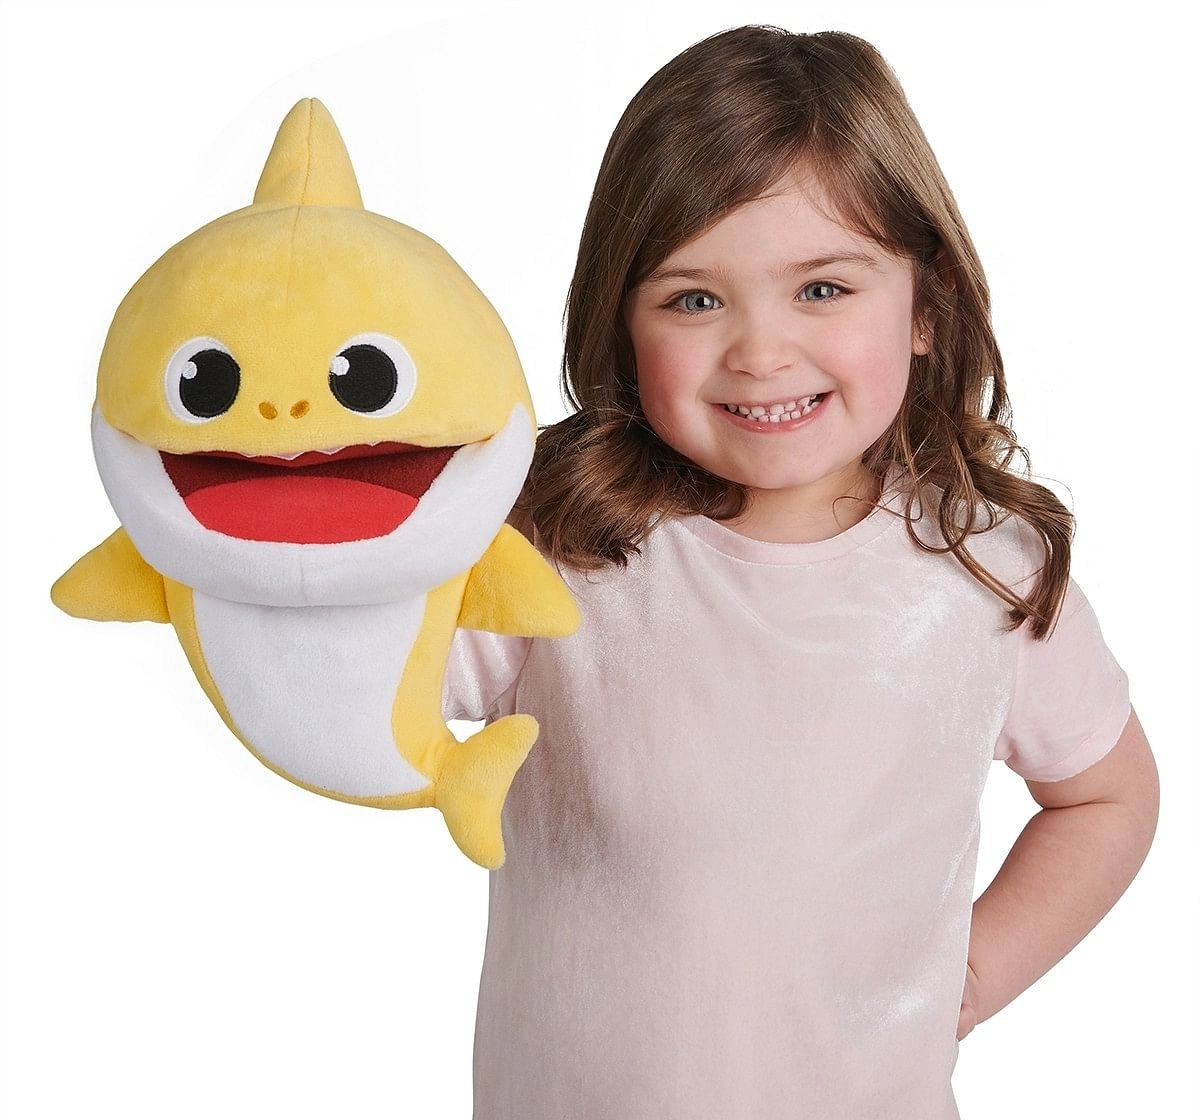 Pinkfong Shark Family Plush Puppet - Baby Shark for Kids age 3Y+